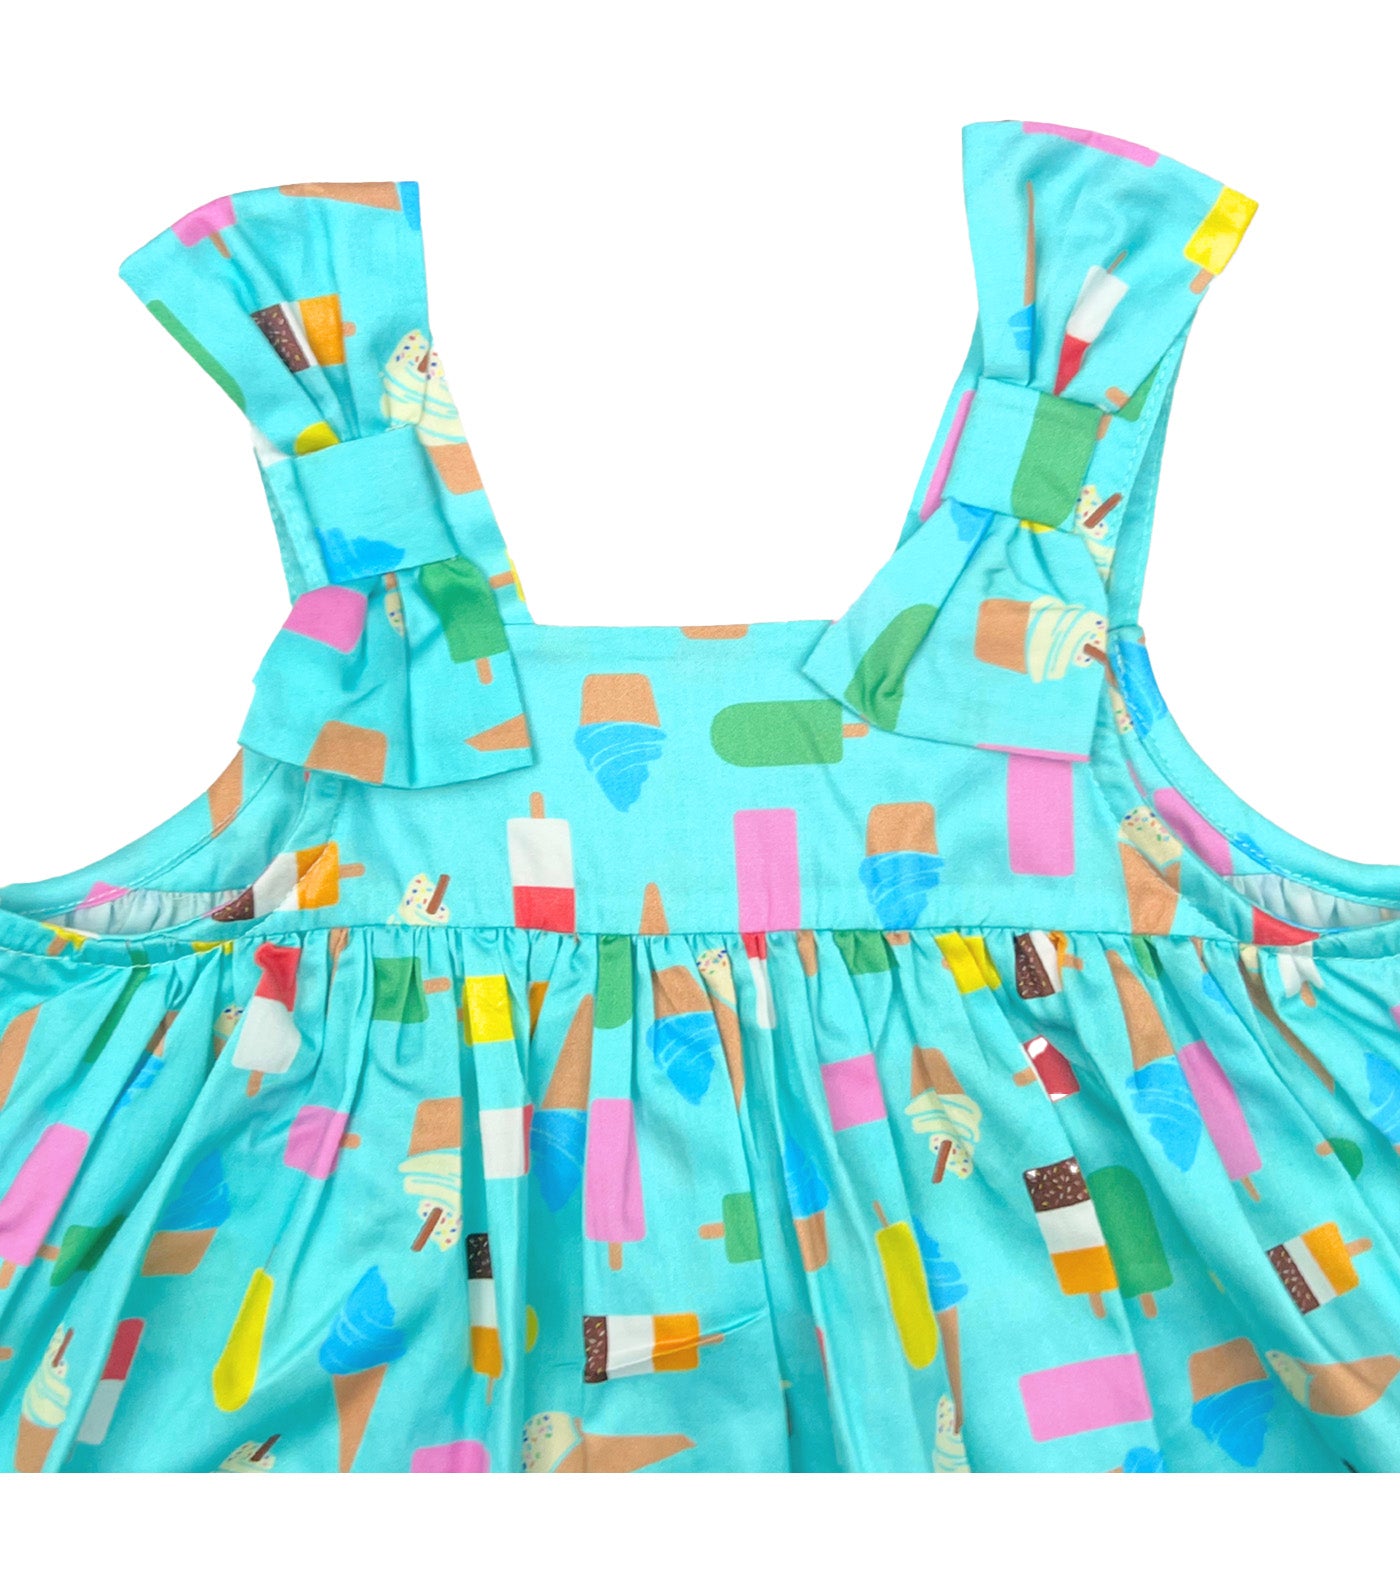 Hailey Baby Girls Empire Dress with Diaper Cover Blue Green